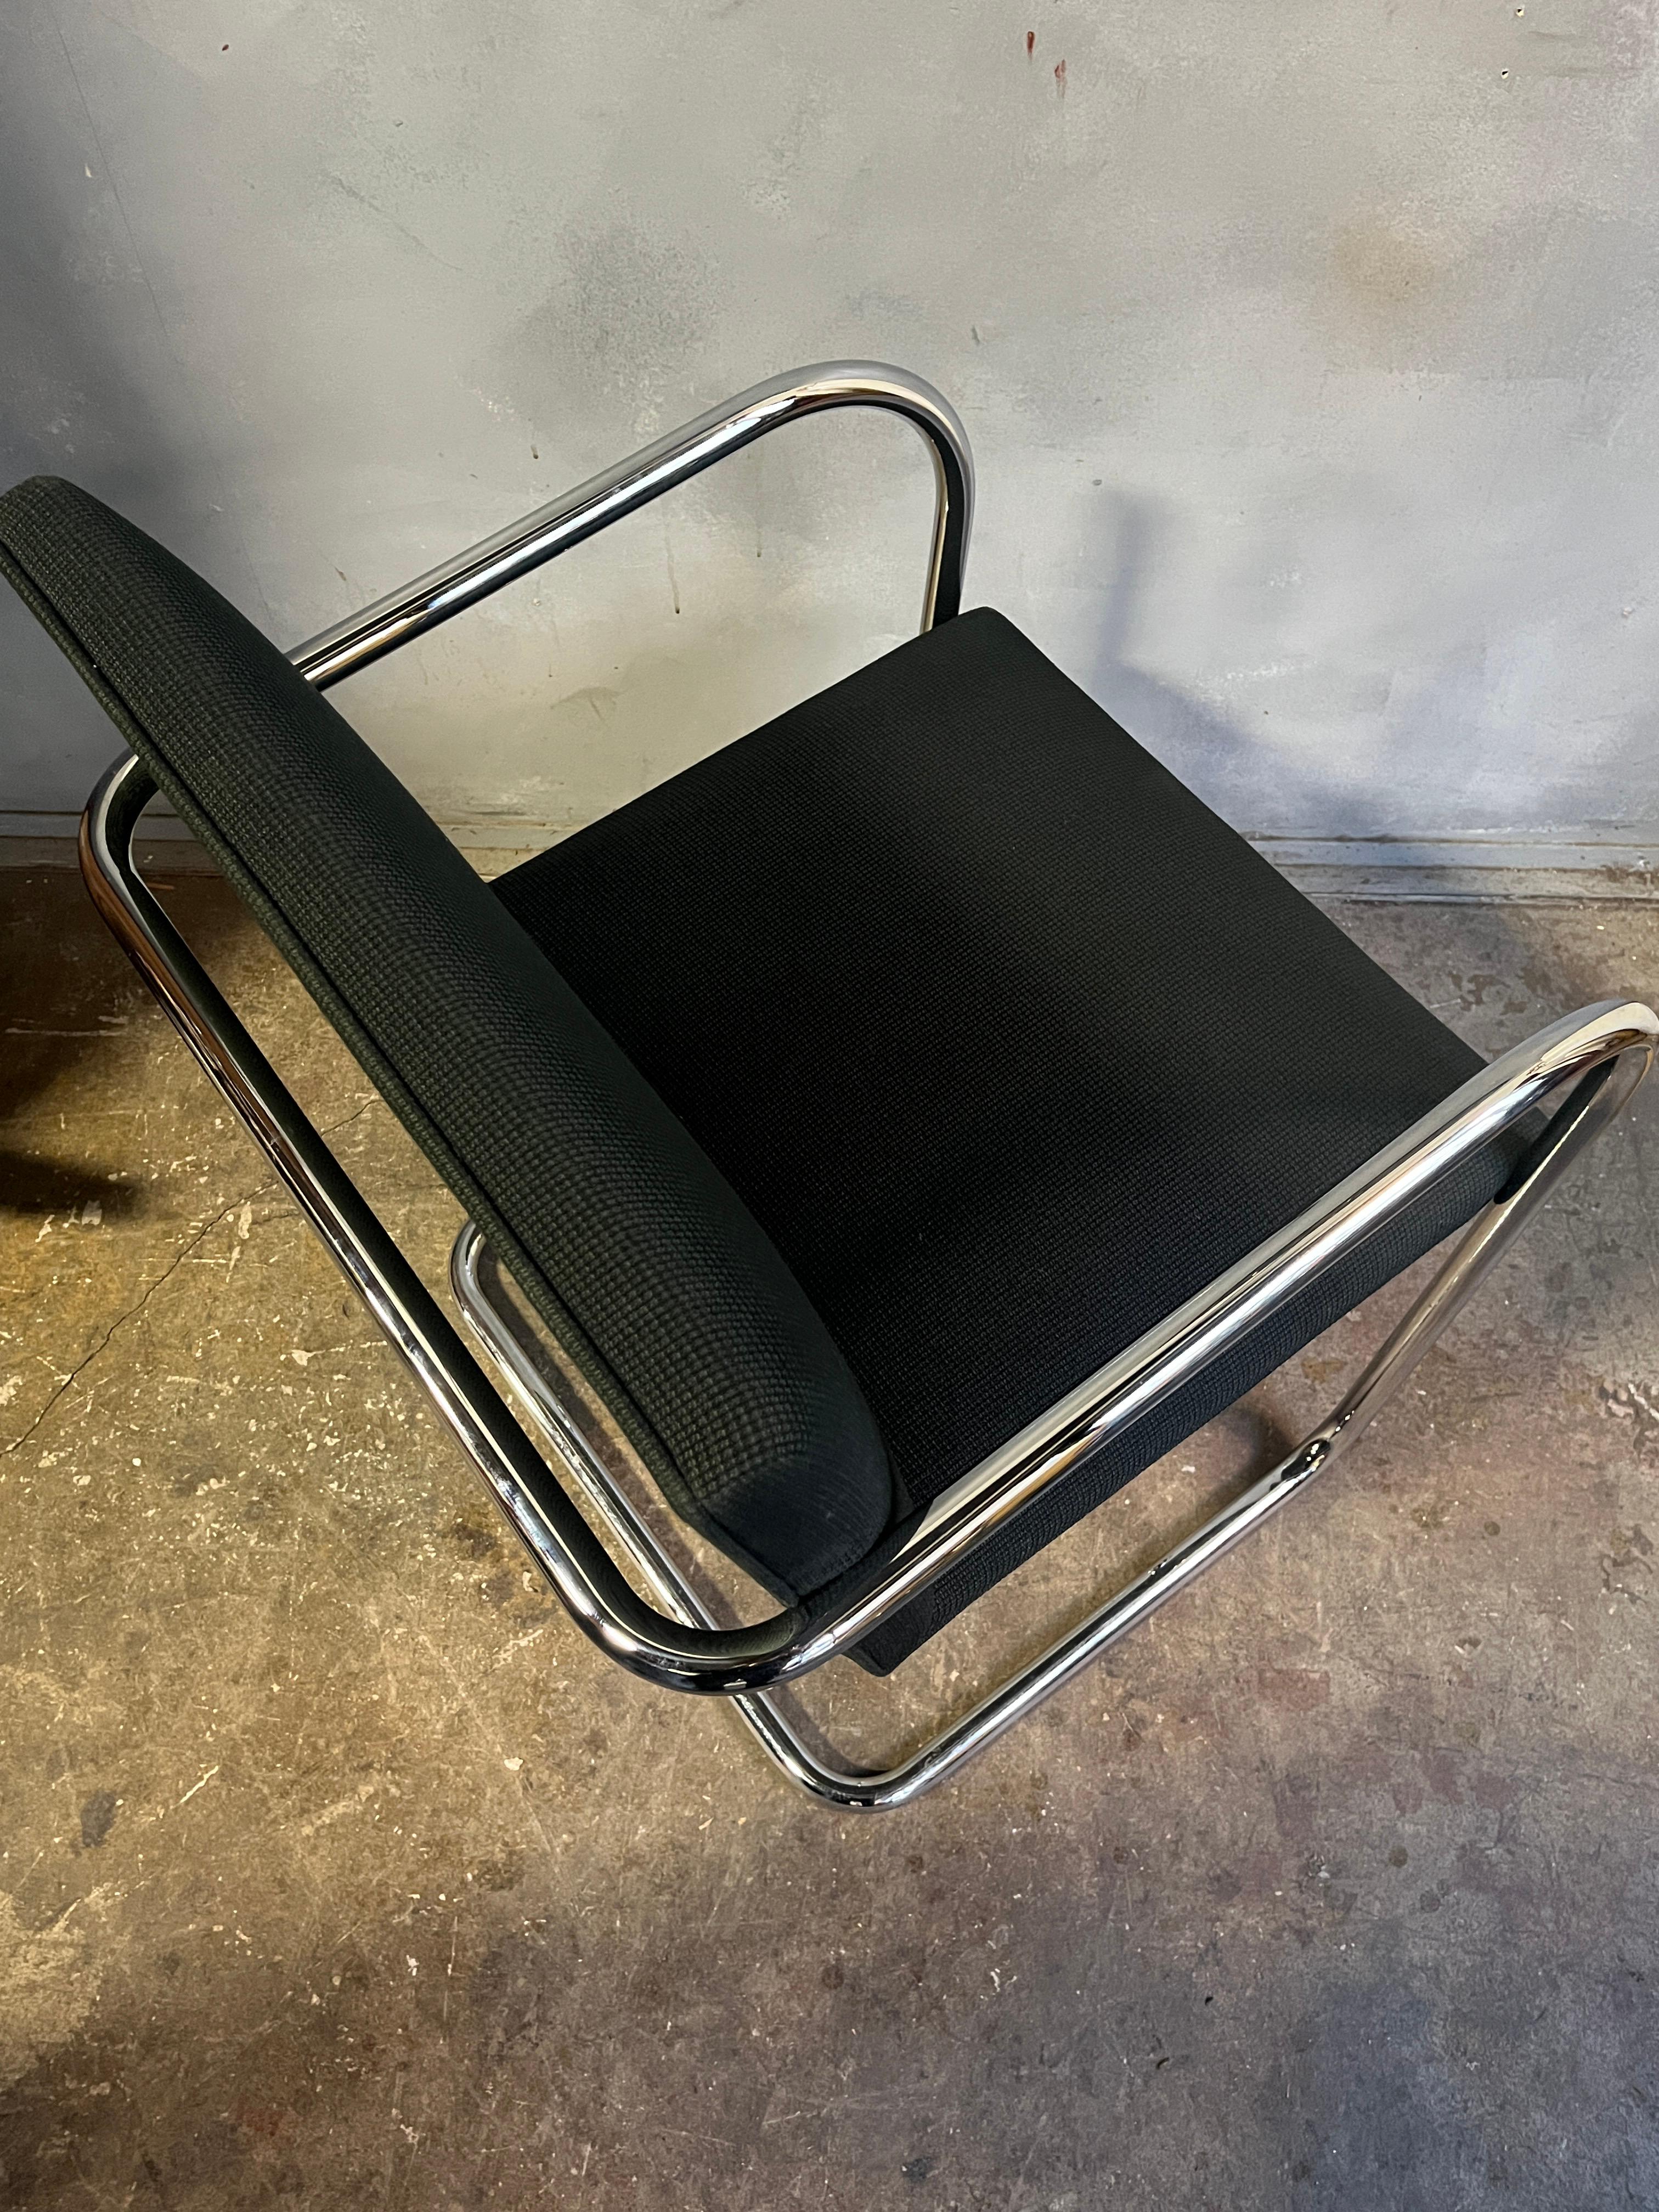 Chrome Midcentury Knoll Brno Chairs by Mies Van Der Rohe in Black 30 Available For Sale